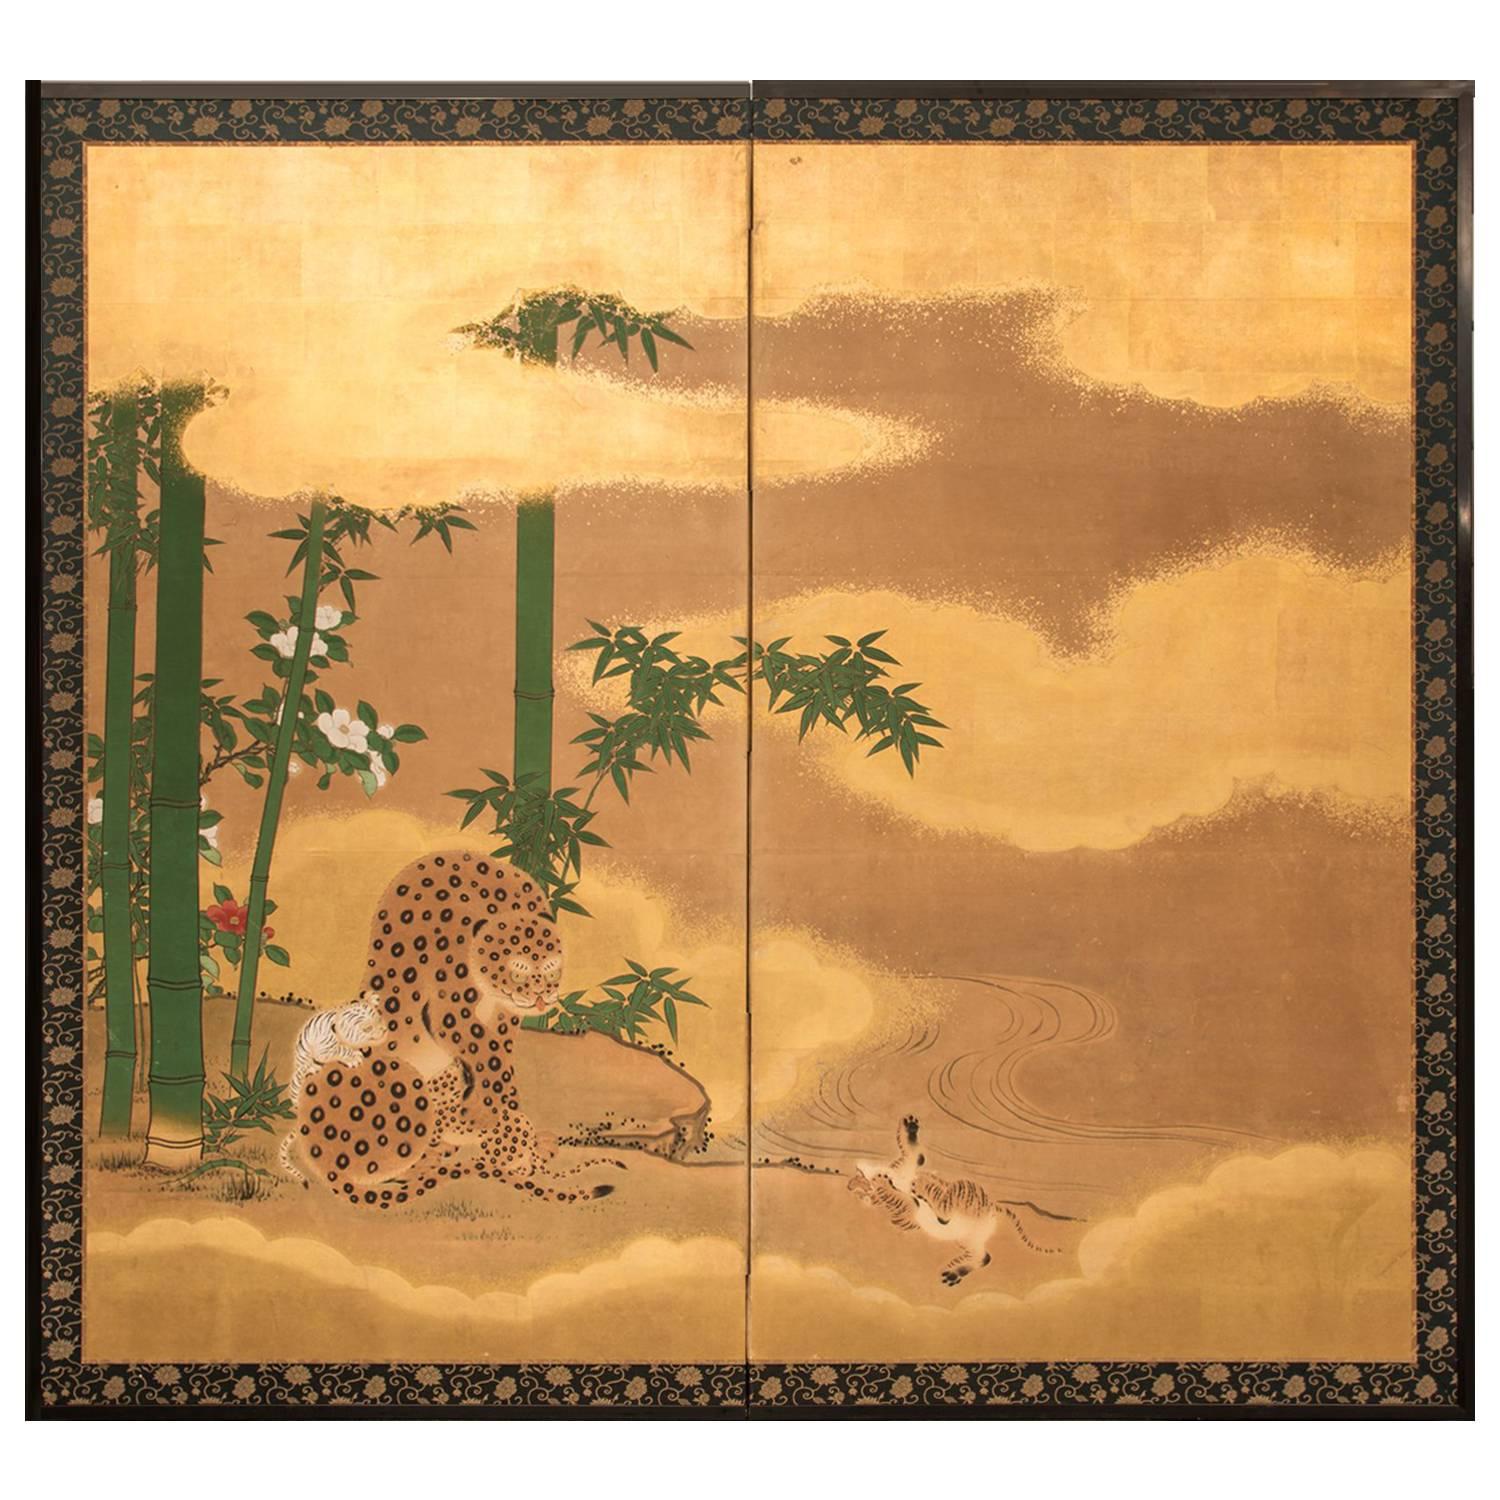 Japanese Two-Panel Screen "Leopard with Cubs"